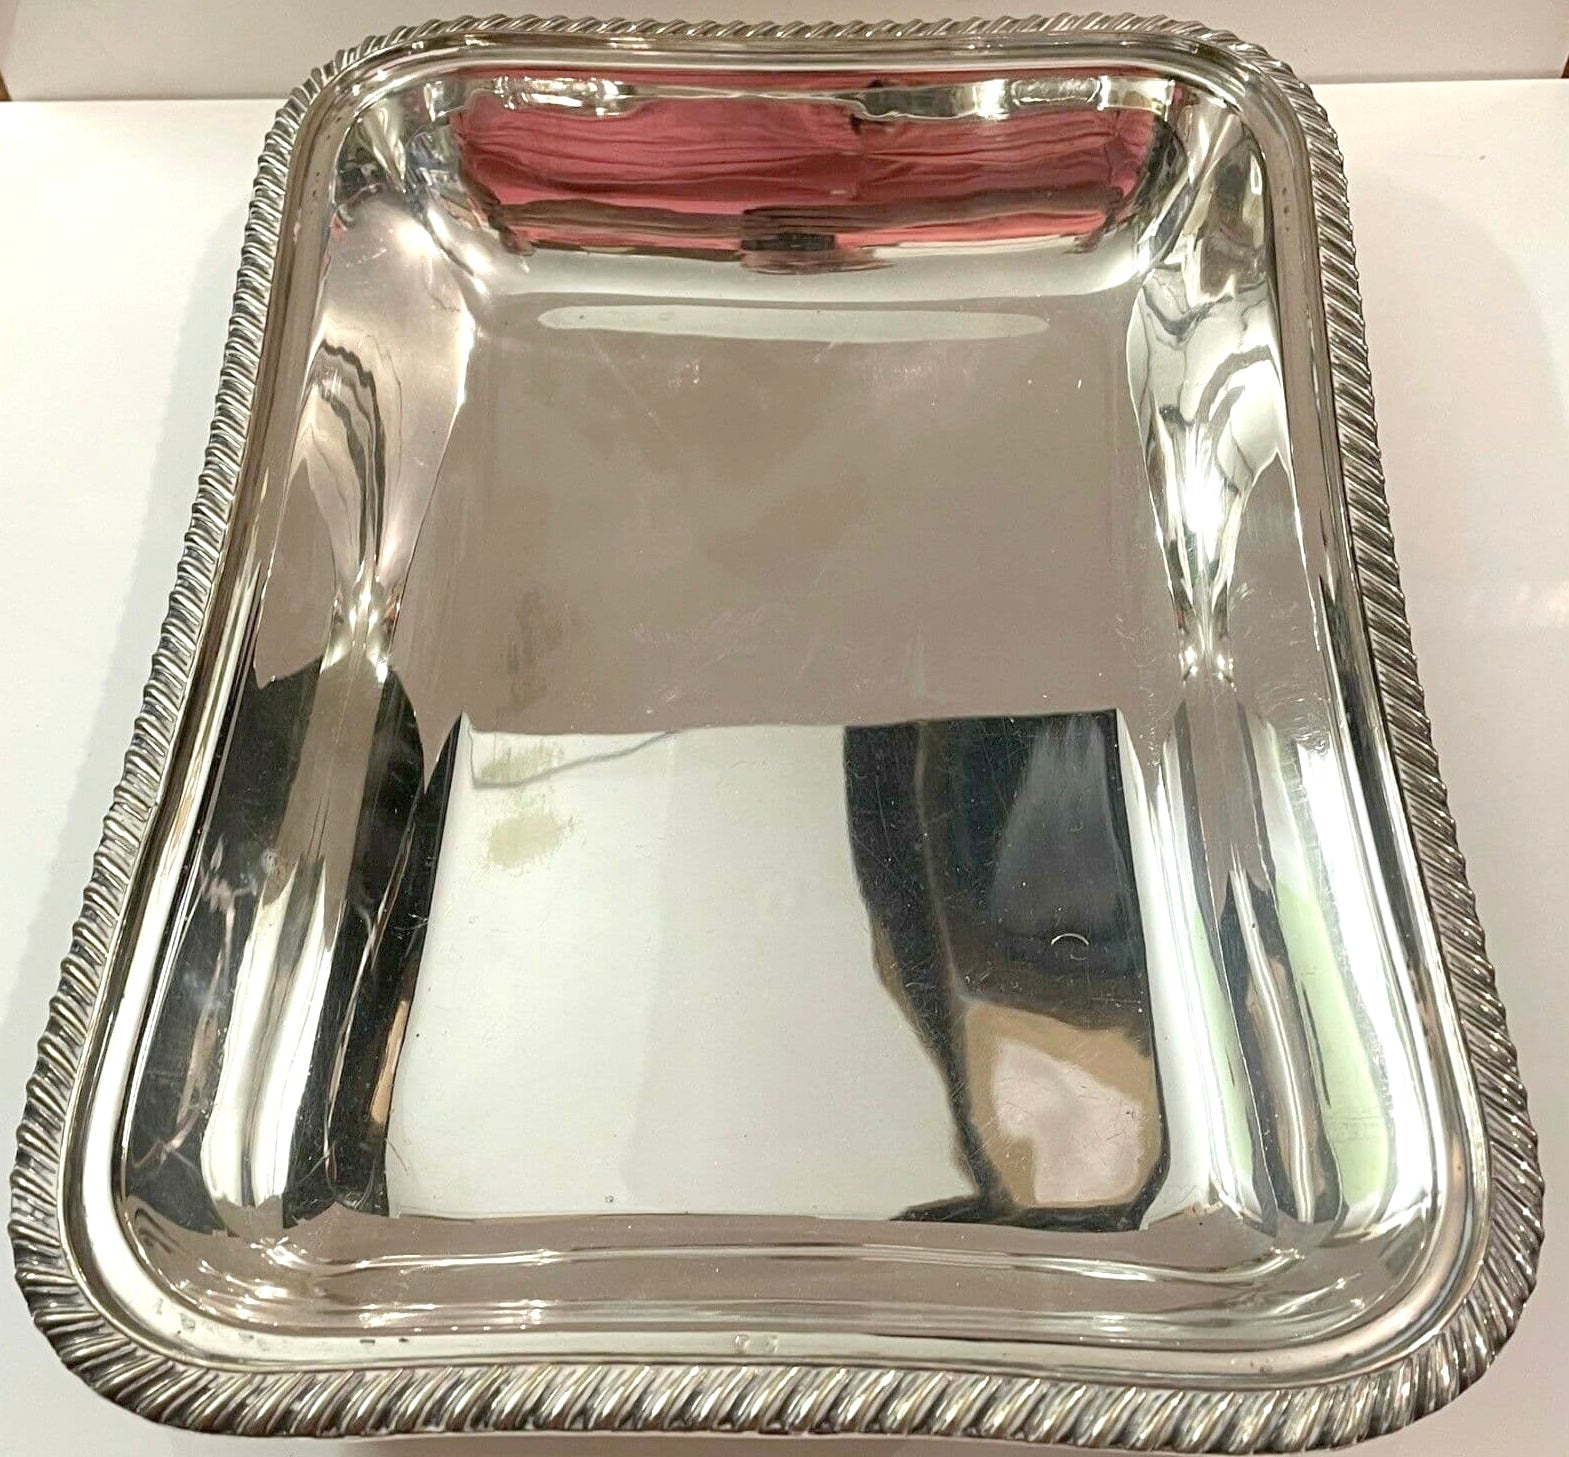 Silver plated serving tray - 11 inches x 8 inches - Pre Loved